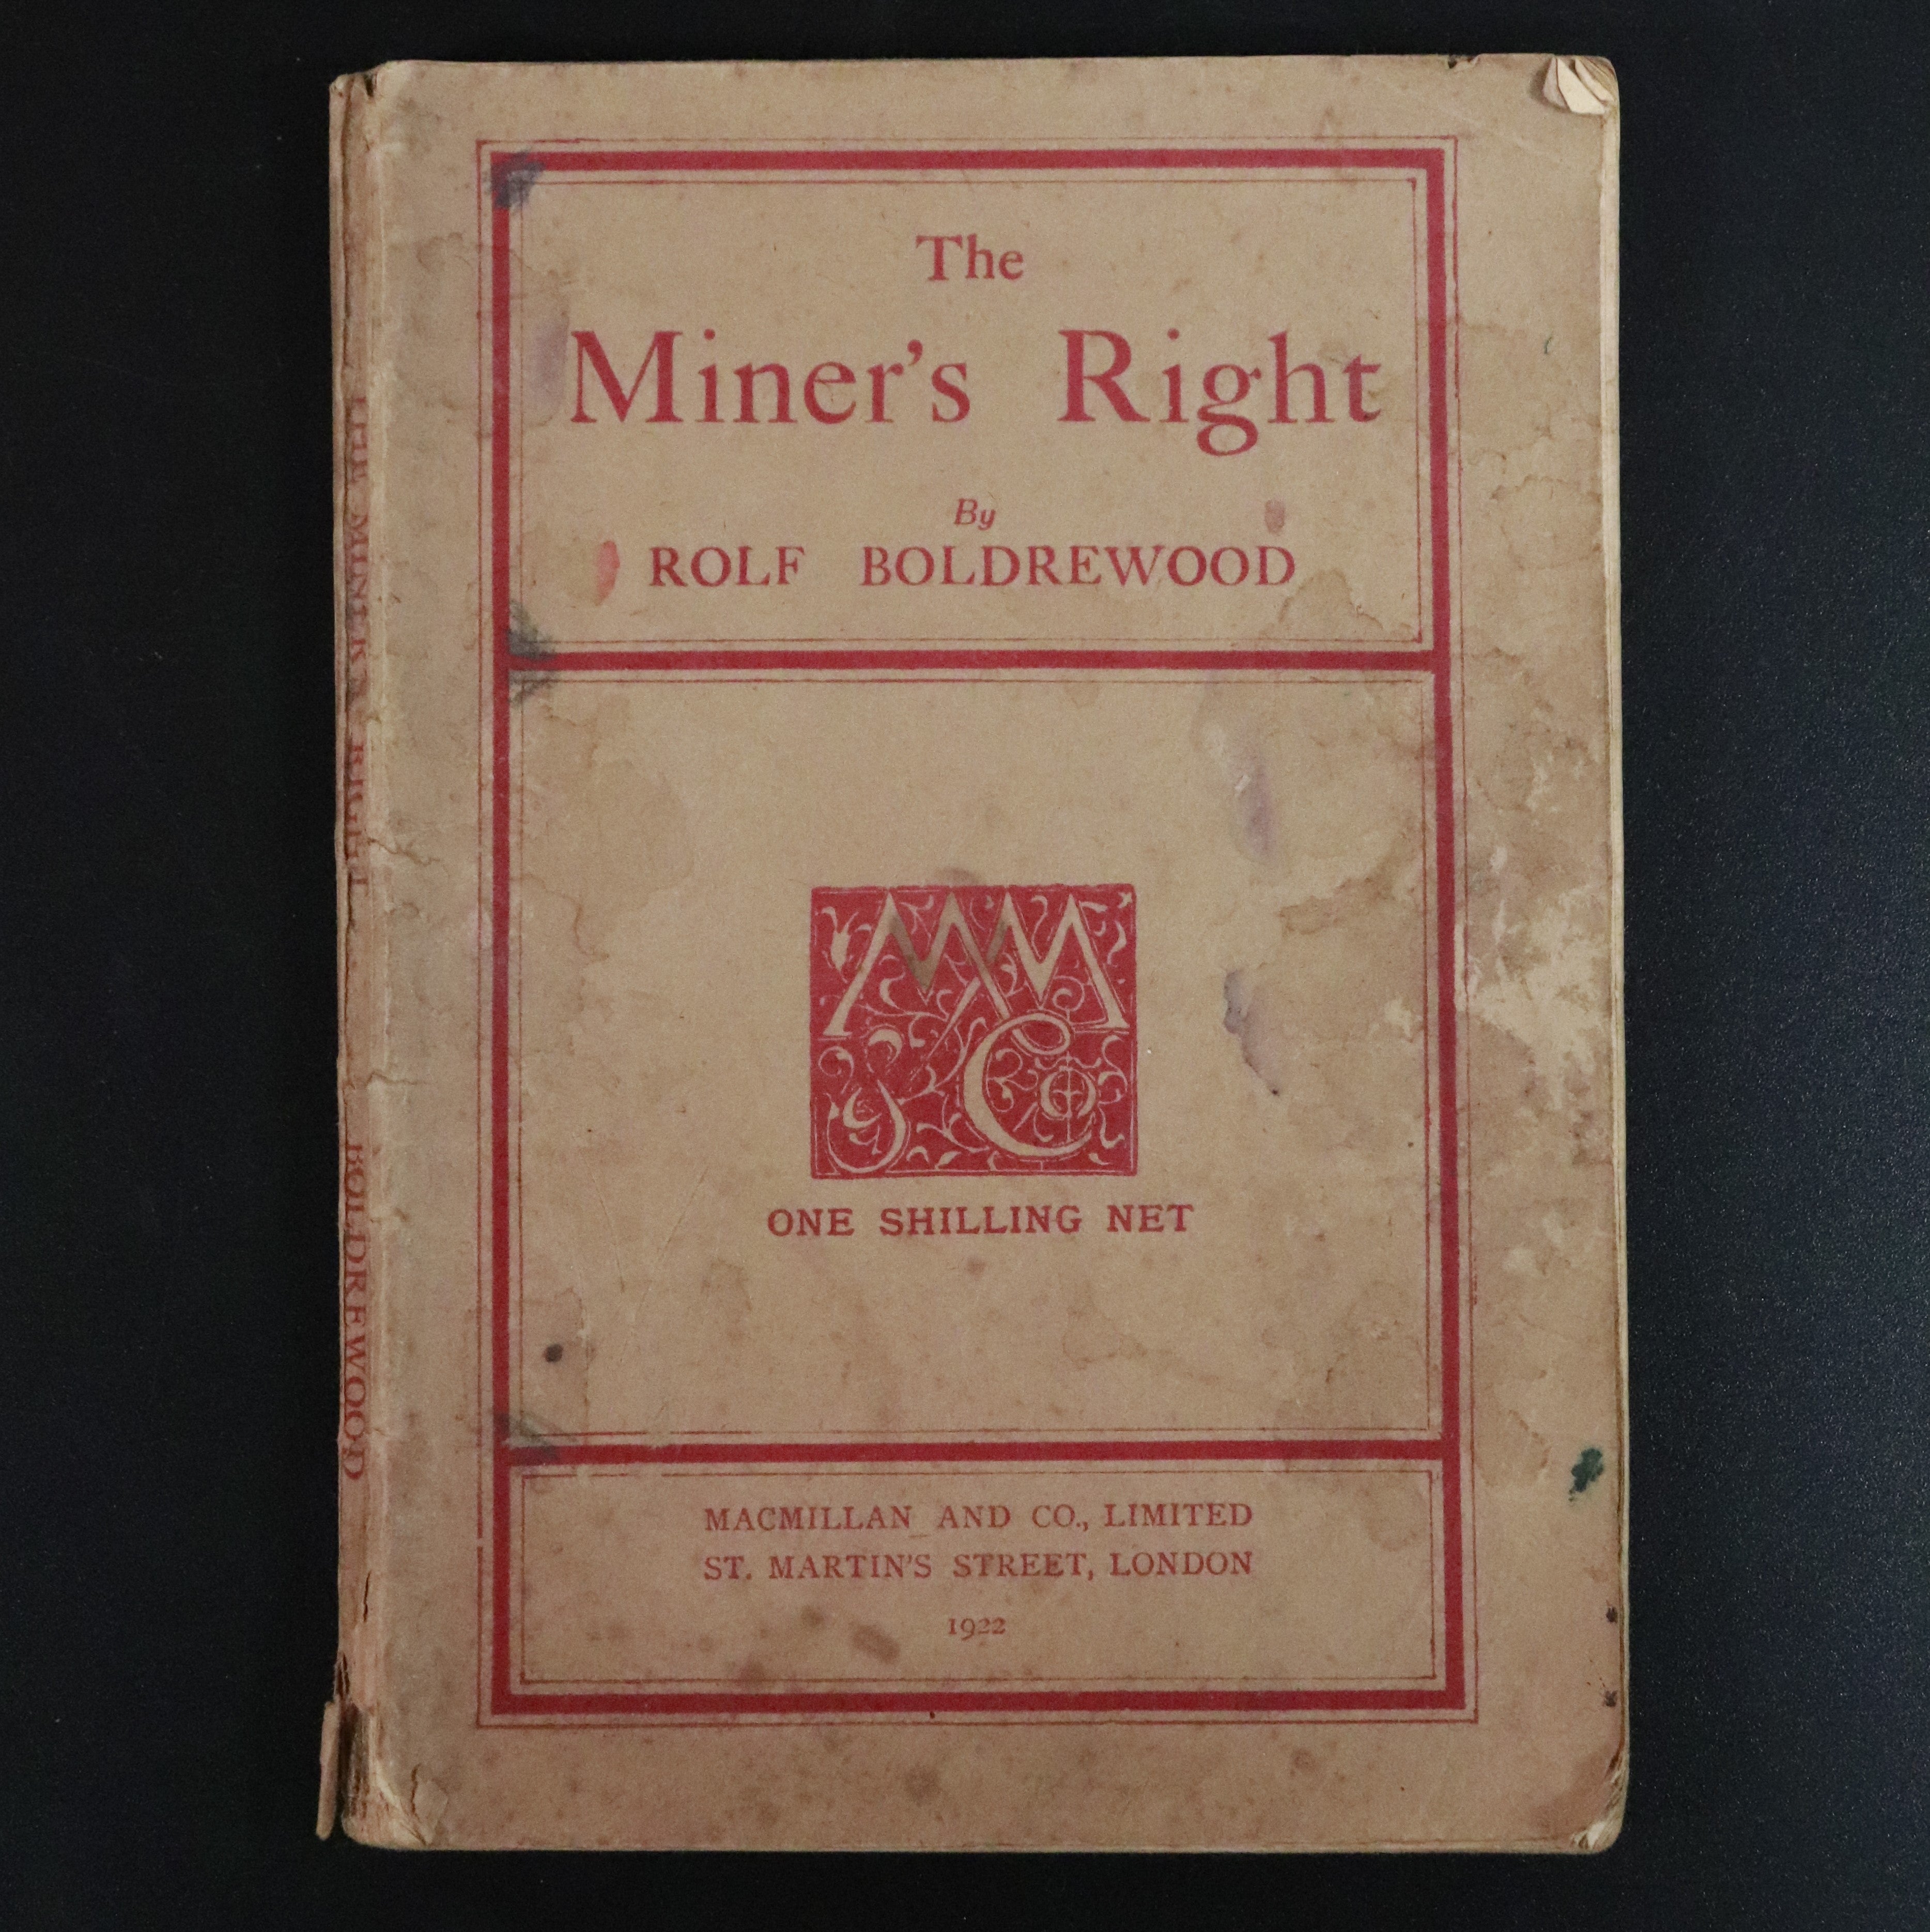 1922 The Miner's Right by Rolf Boldrewood Antique Australian Goldfields Book